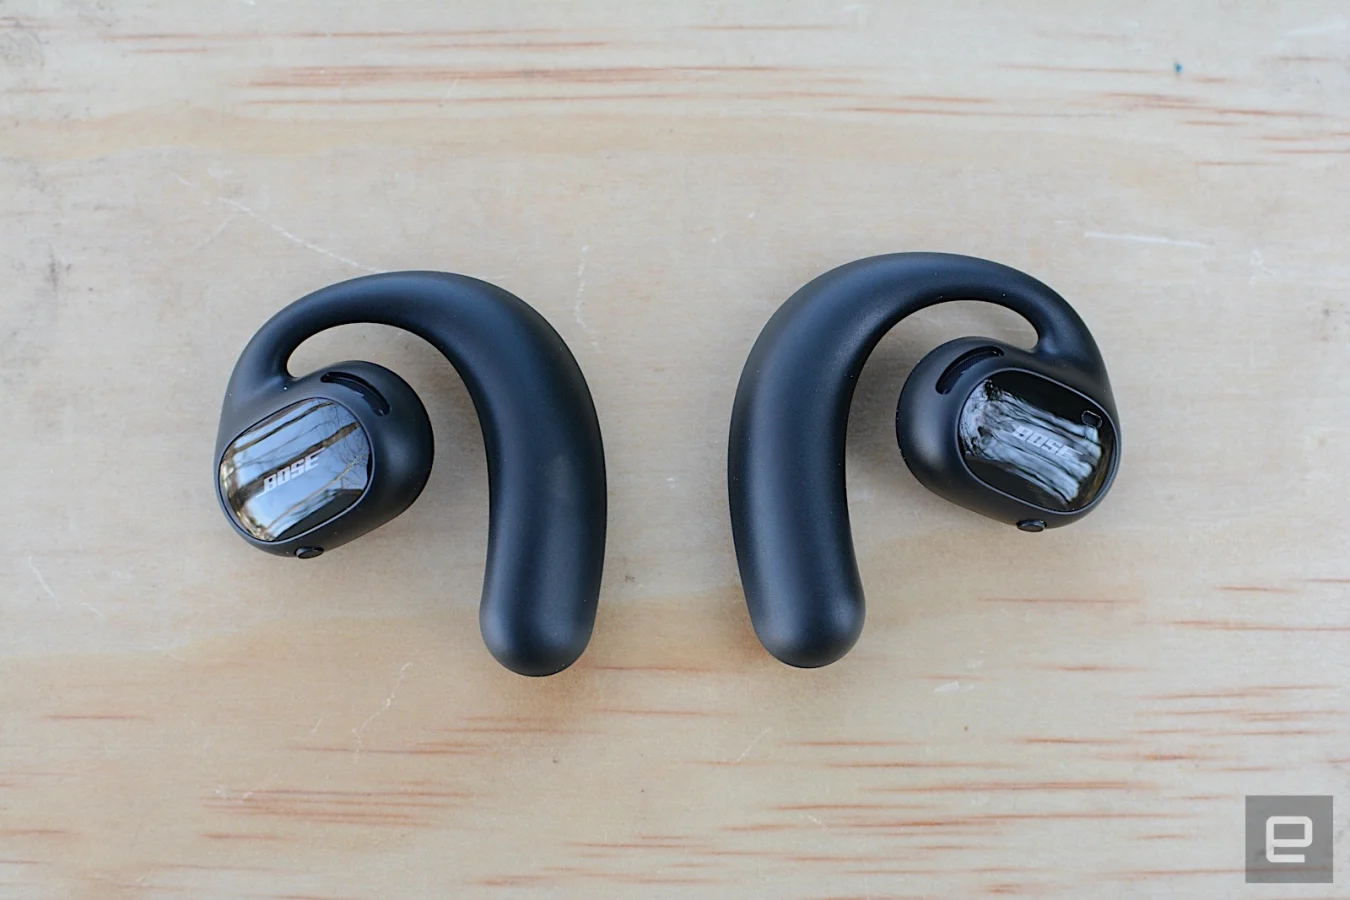 Bose open earbuds. Bose Sport open Earbuds. Bose Sport Earbuds.